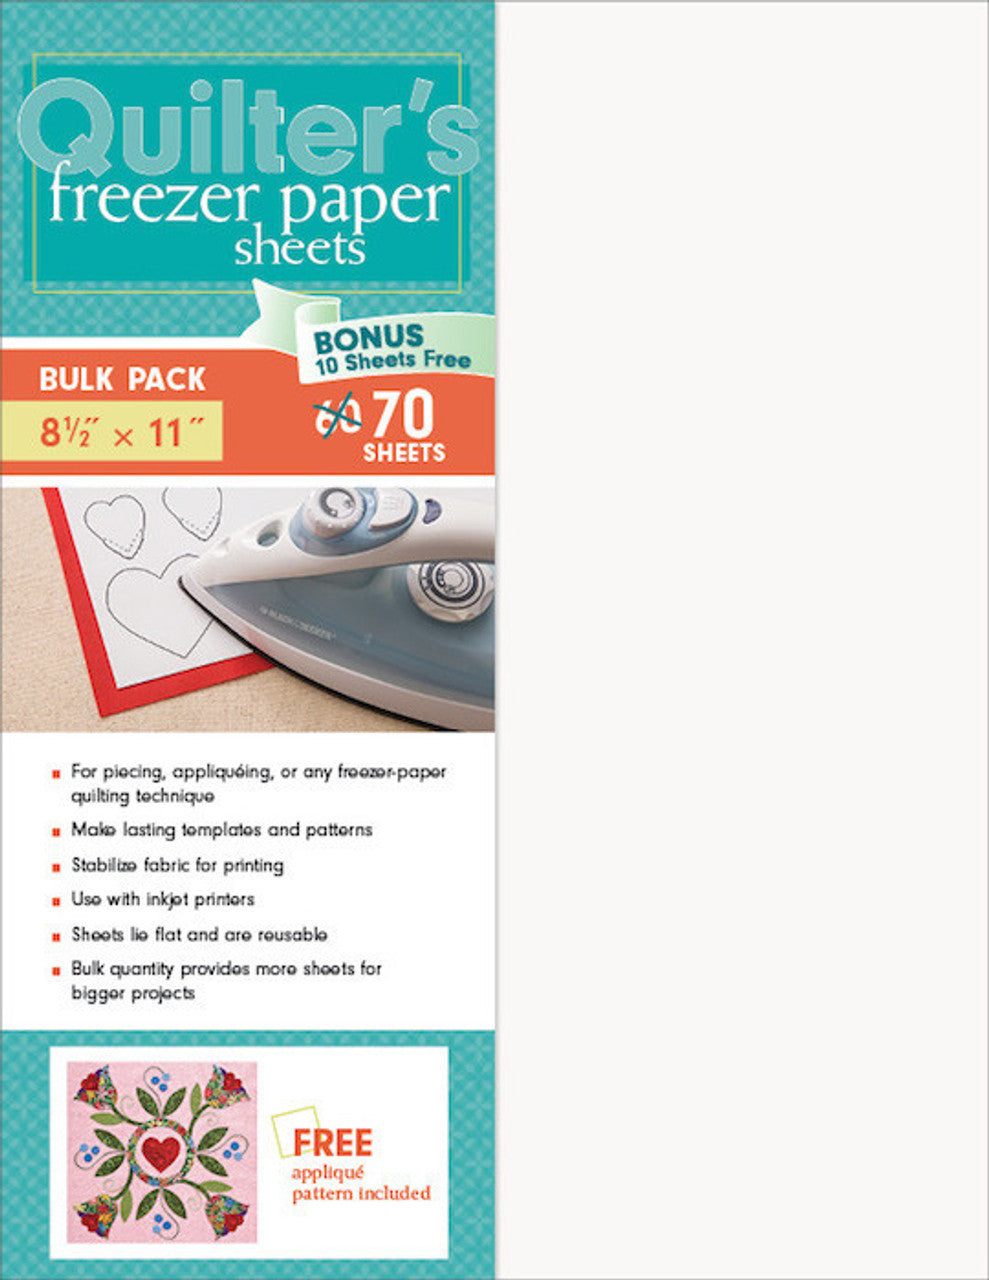 Quilter's Freezer Paper in the packaging, showing 70 sheets and noting free applique pattern included